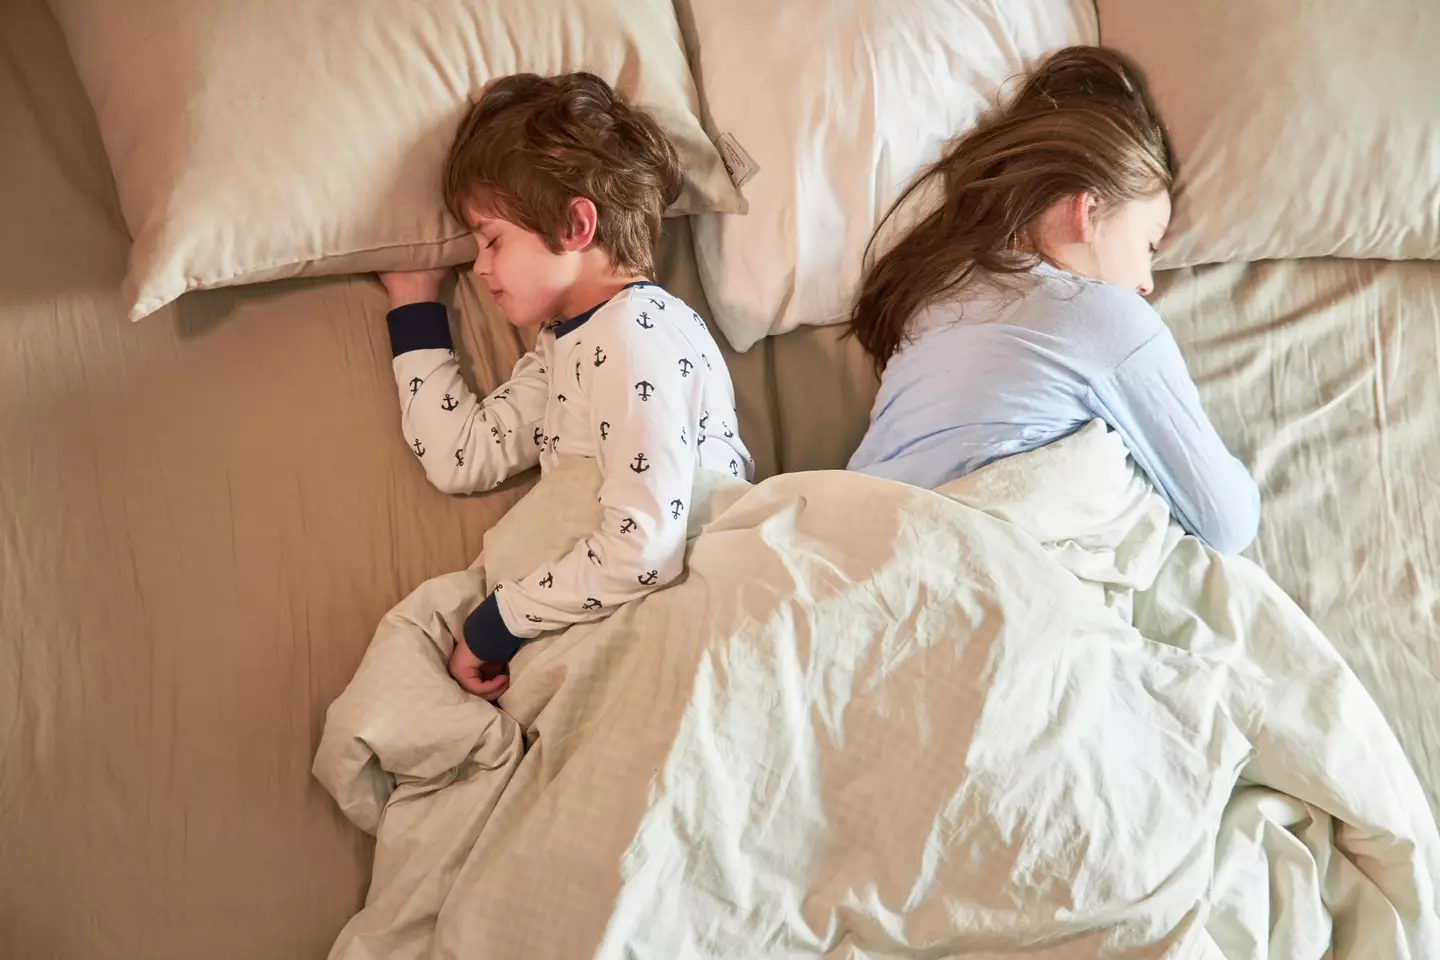 One school has revealed how much sleep kids should be getting.